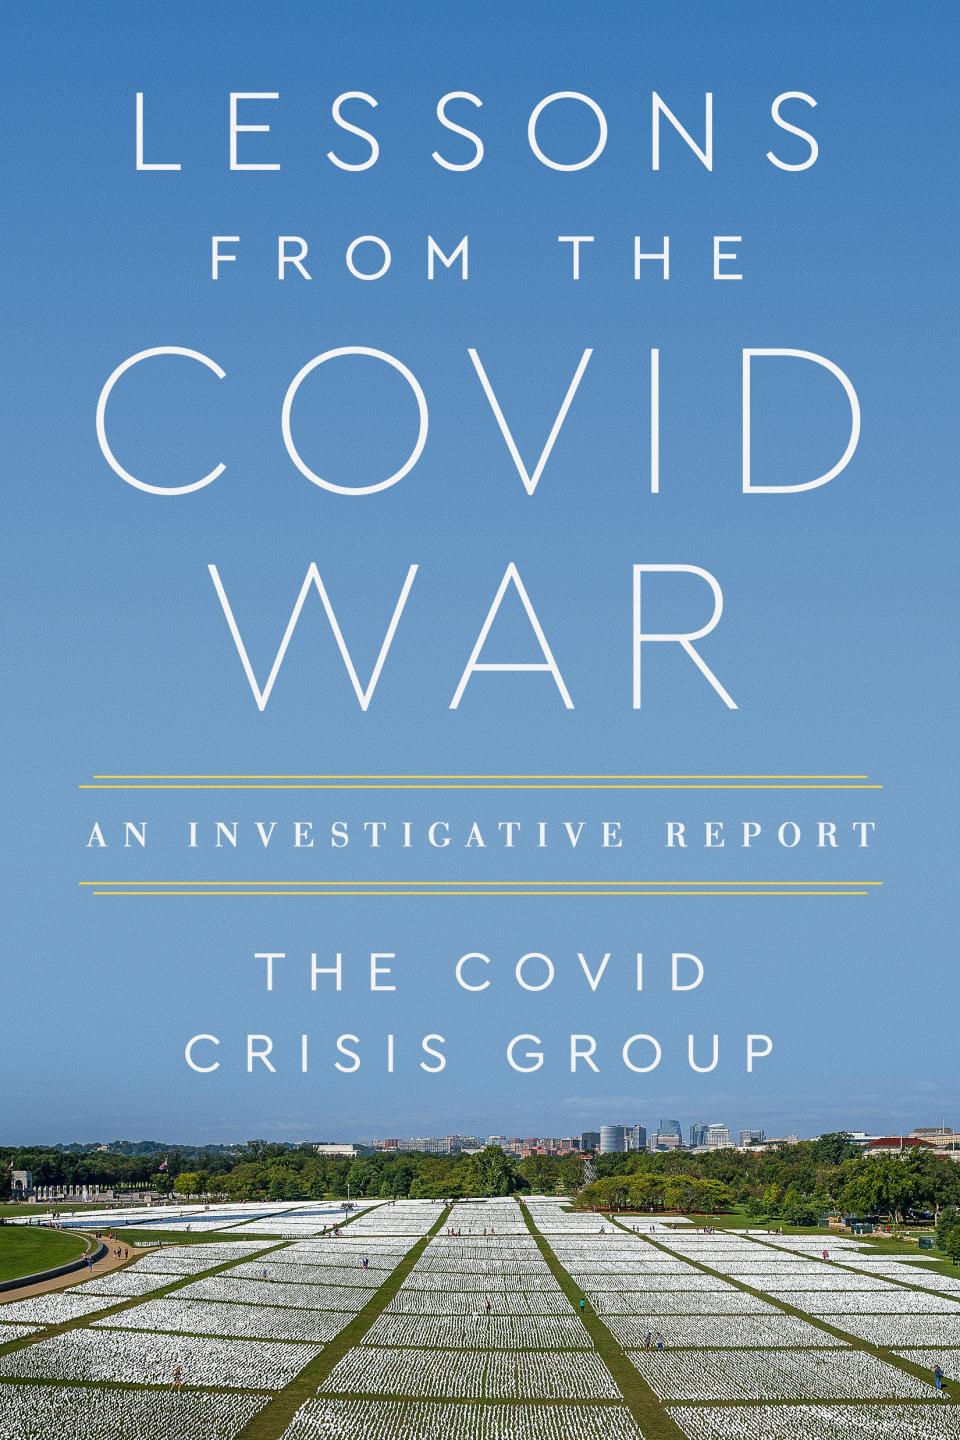 New book from a bipartisan group that reviewed mistakes made in the fight against COVID and suggestions for avoiding similar problems in the future.